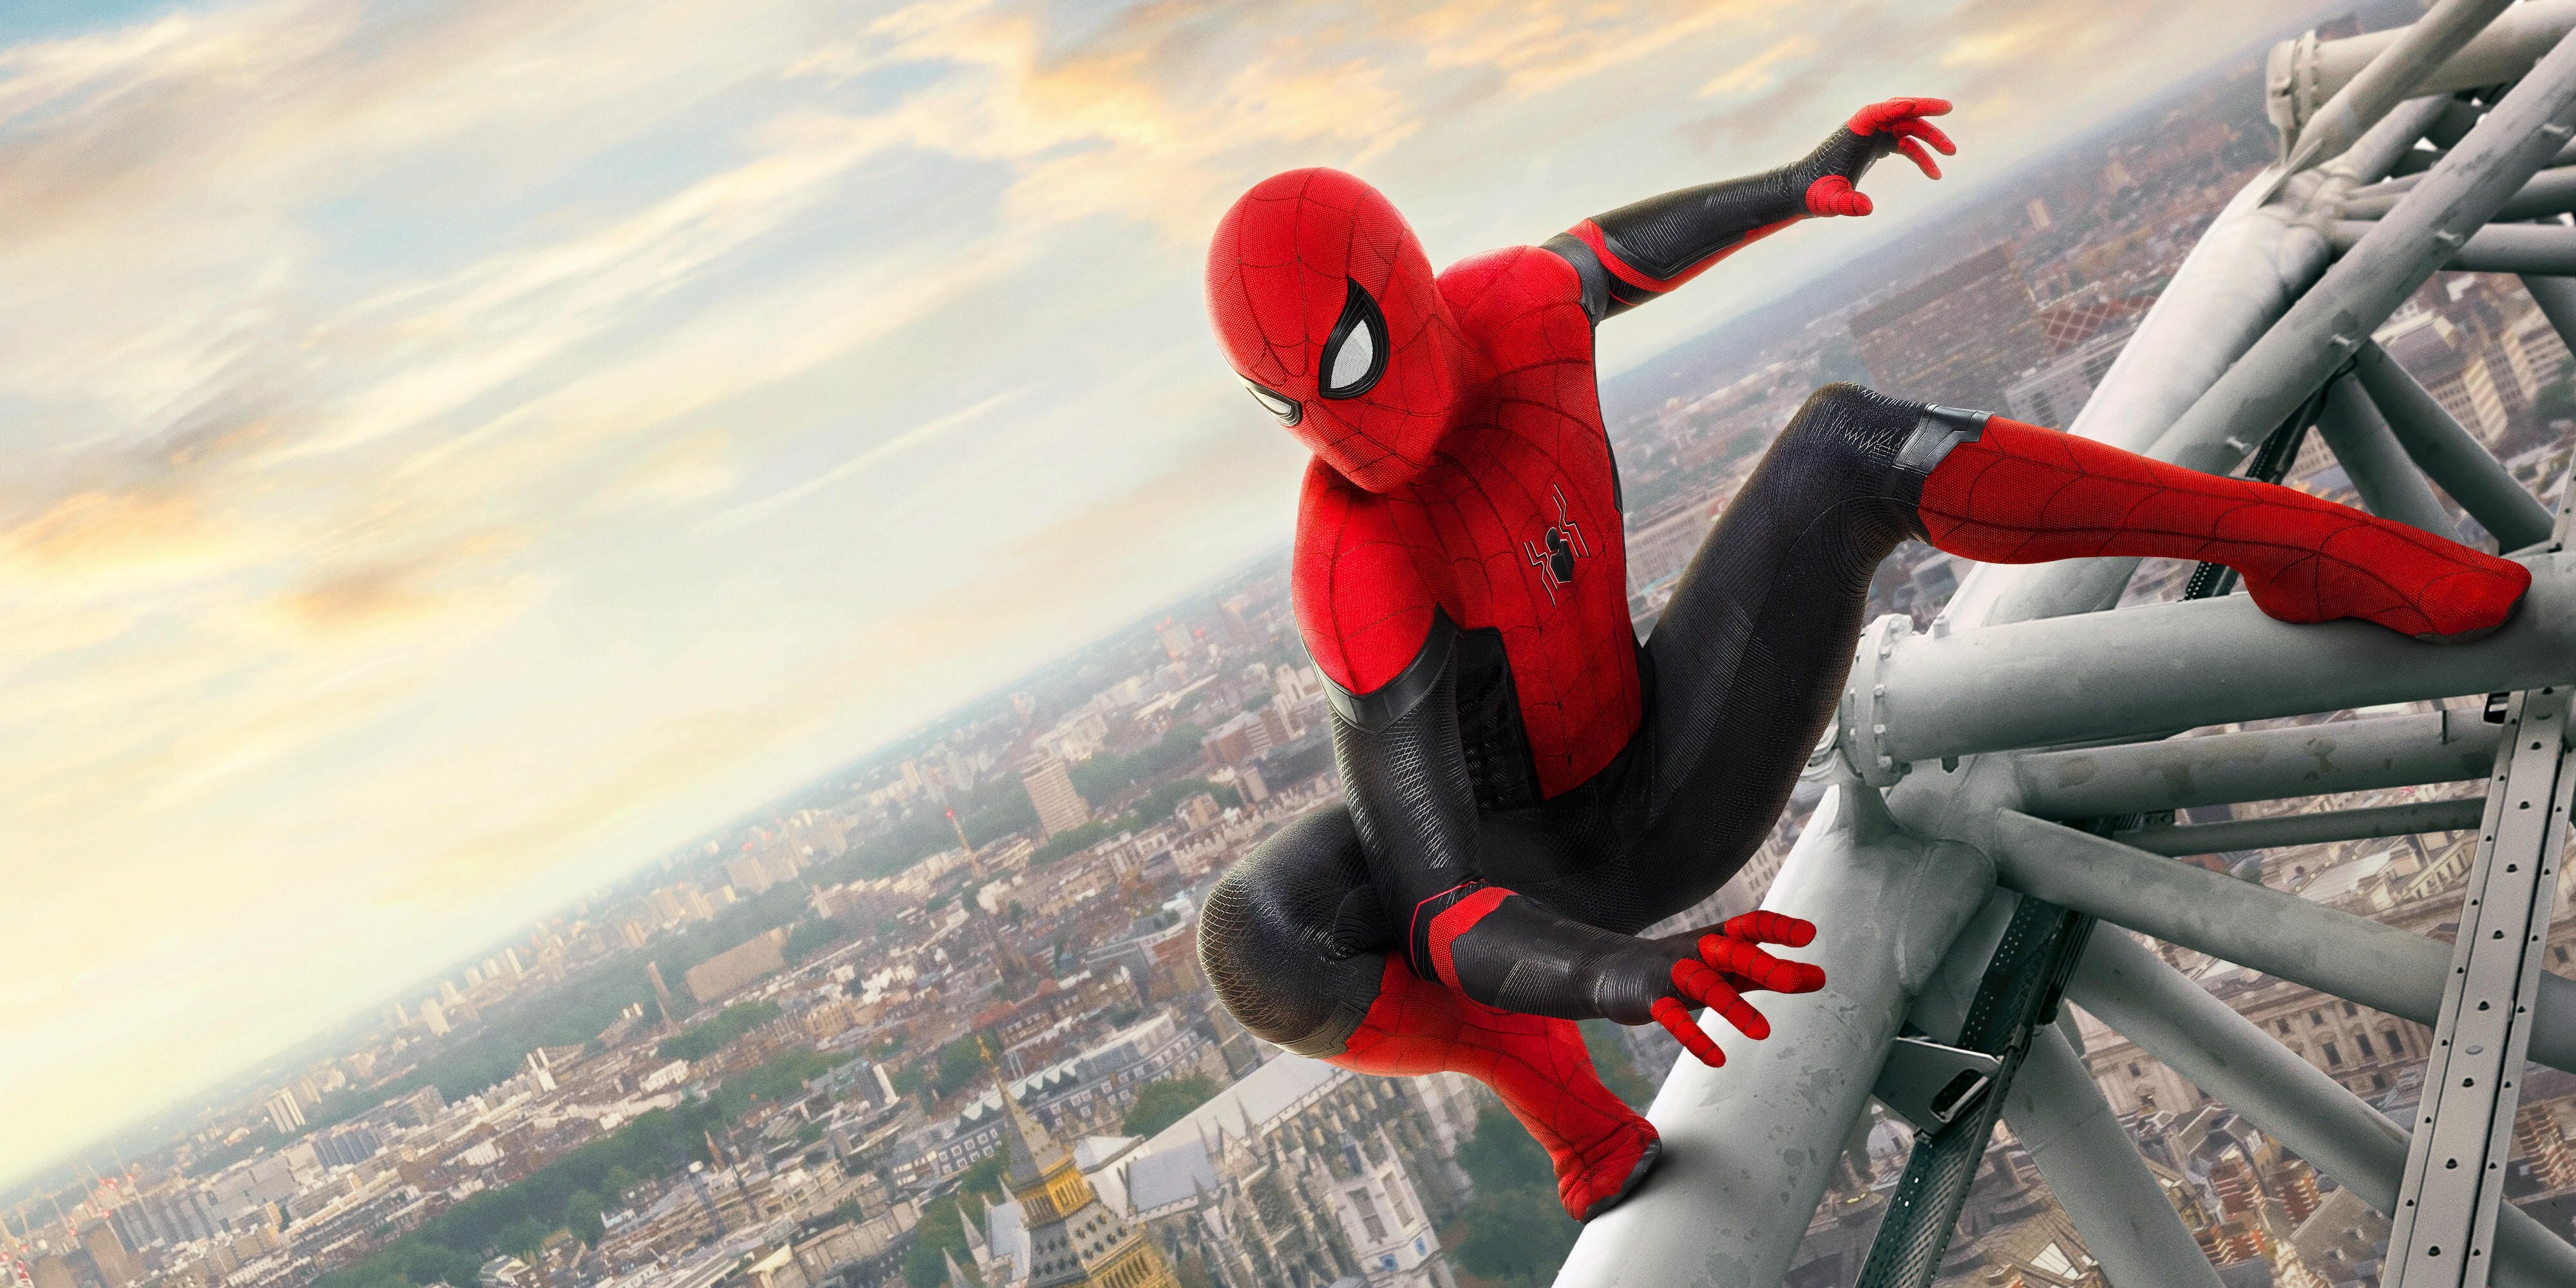 FILM REVIEW |   Spider-Man: Far From Home is far from what I expected says Lewis Pearce